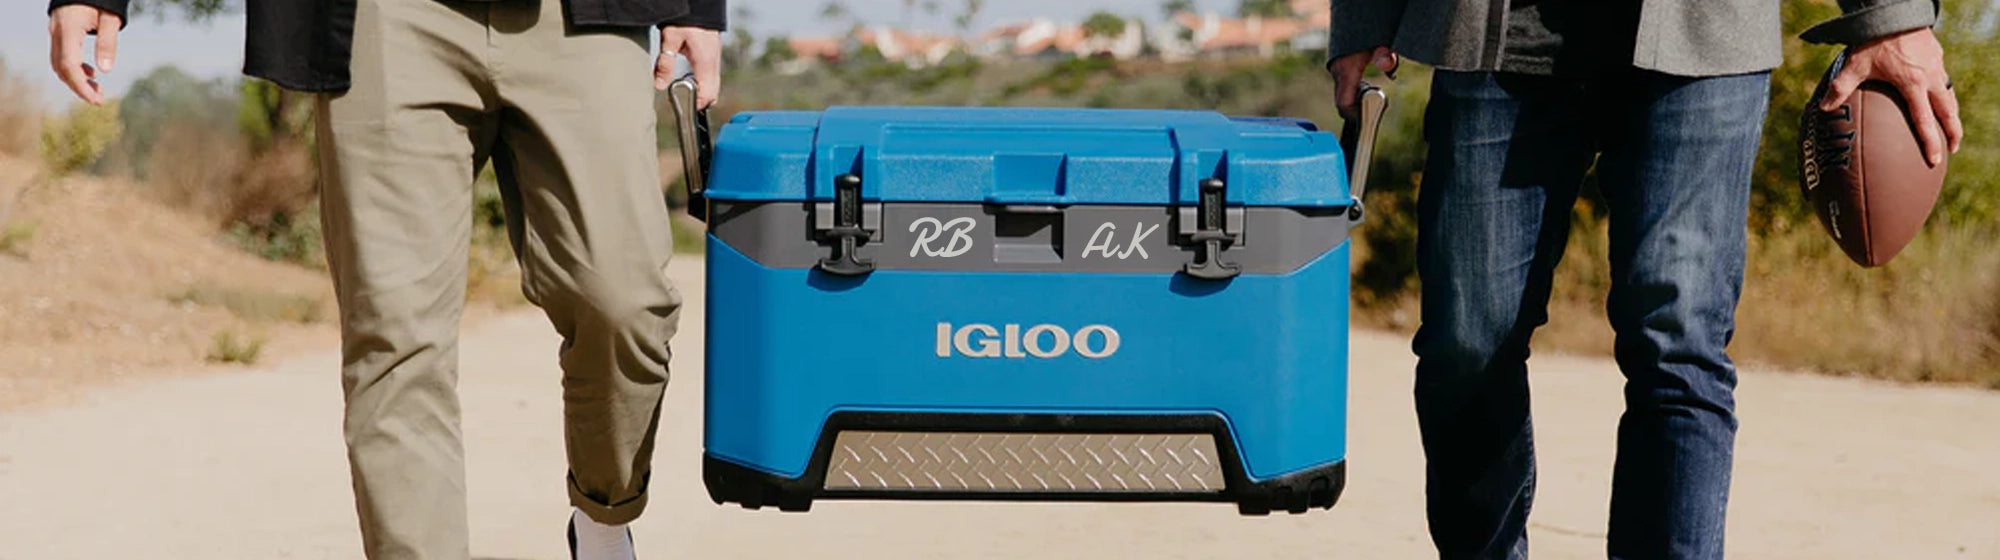 Personalized blue igloo cooler being carried